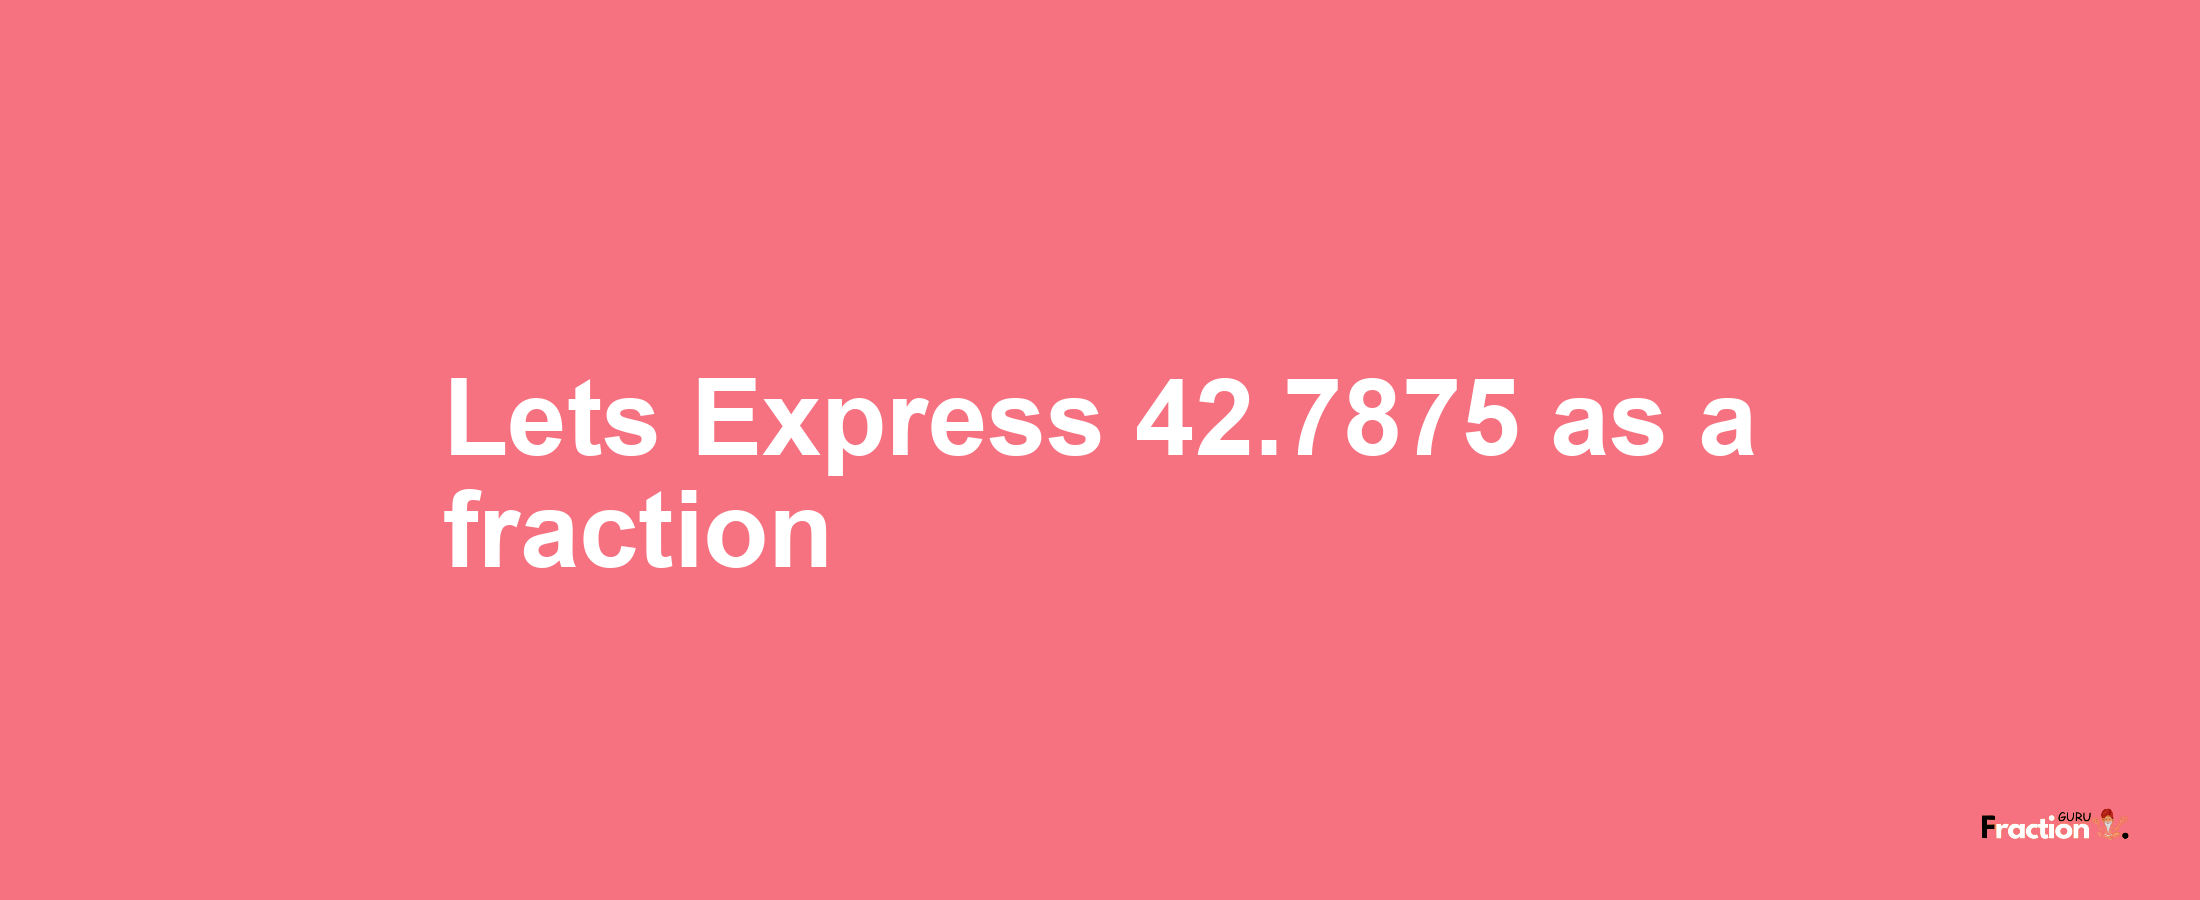 Lets Express 42.7875 as afraction